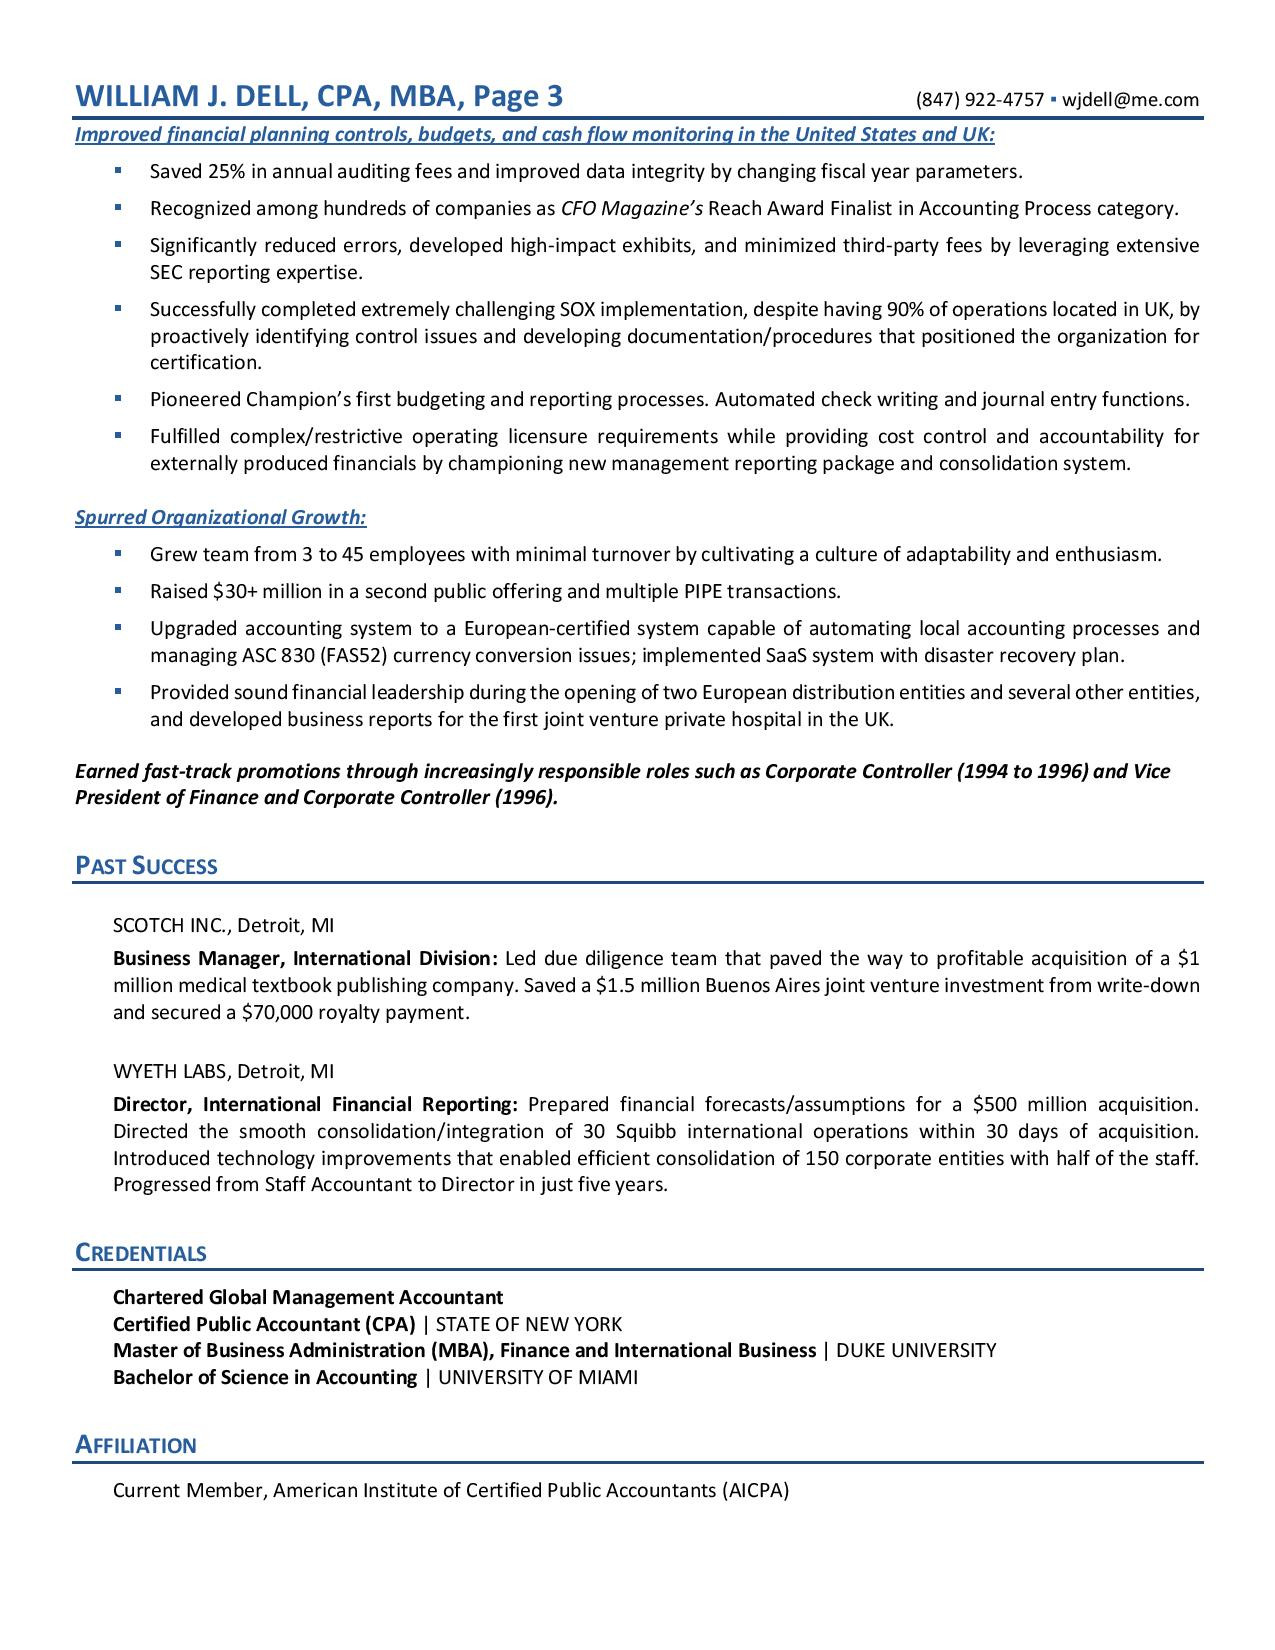 Vp Corporate social Responsibility Resume Sample Samples – Executive Resume Services